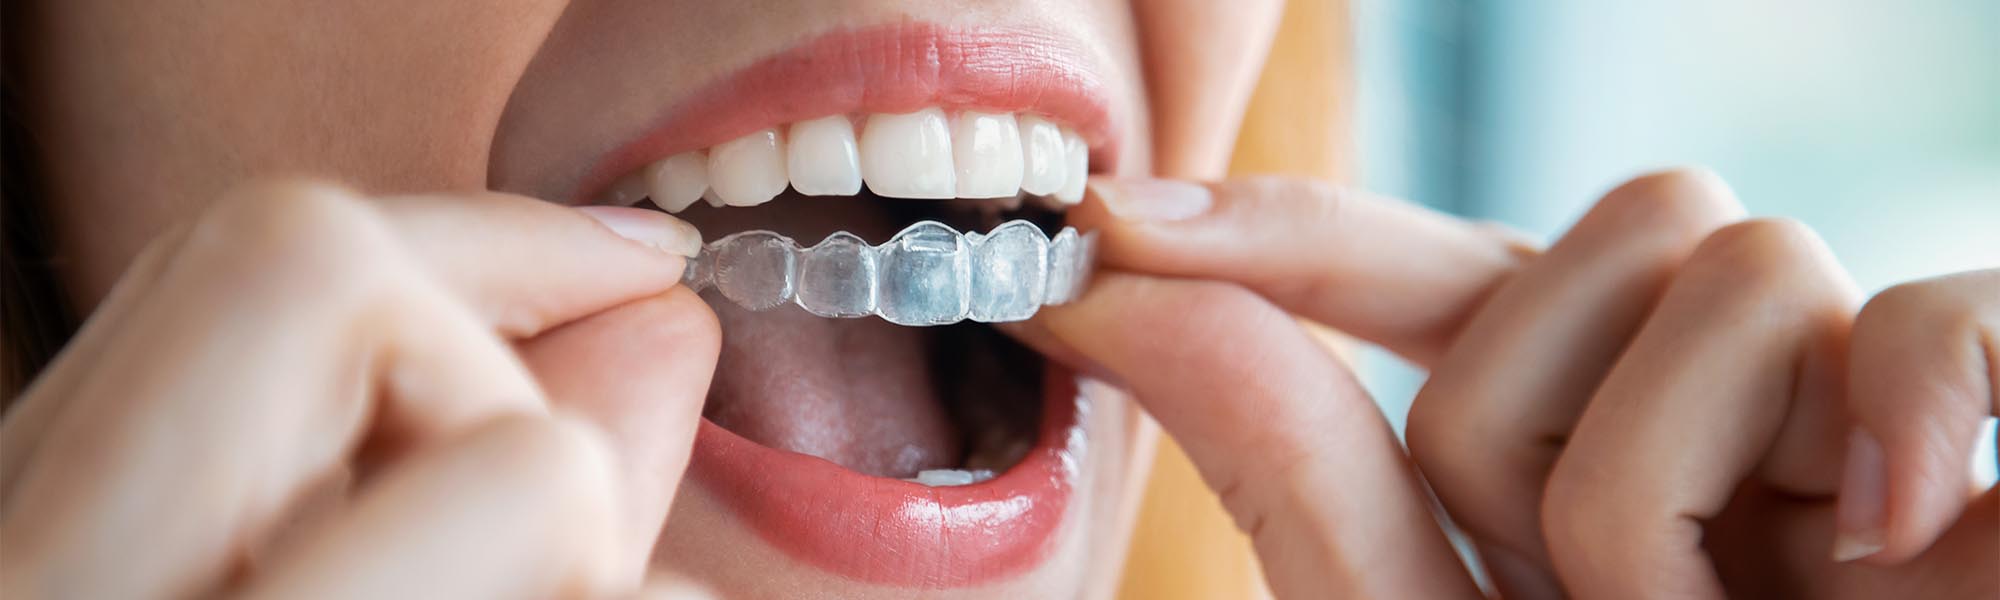 Orthodontic Retainers Long Beach CA - Removable & Permanent Retainer